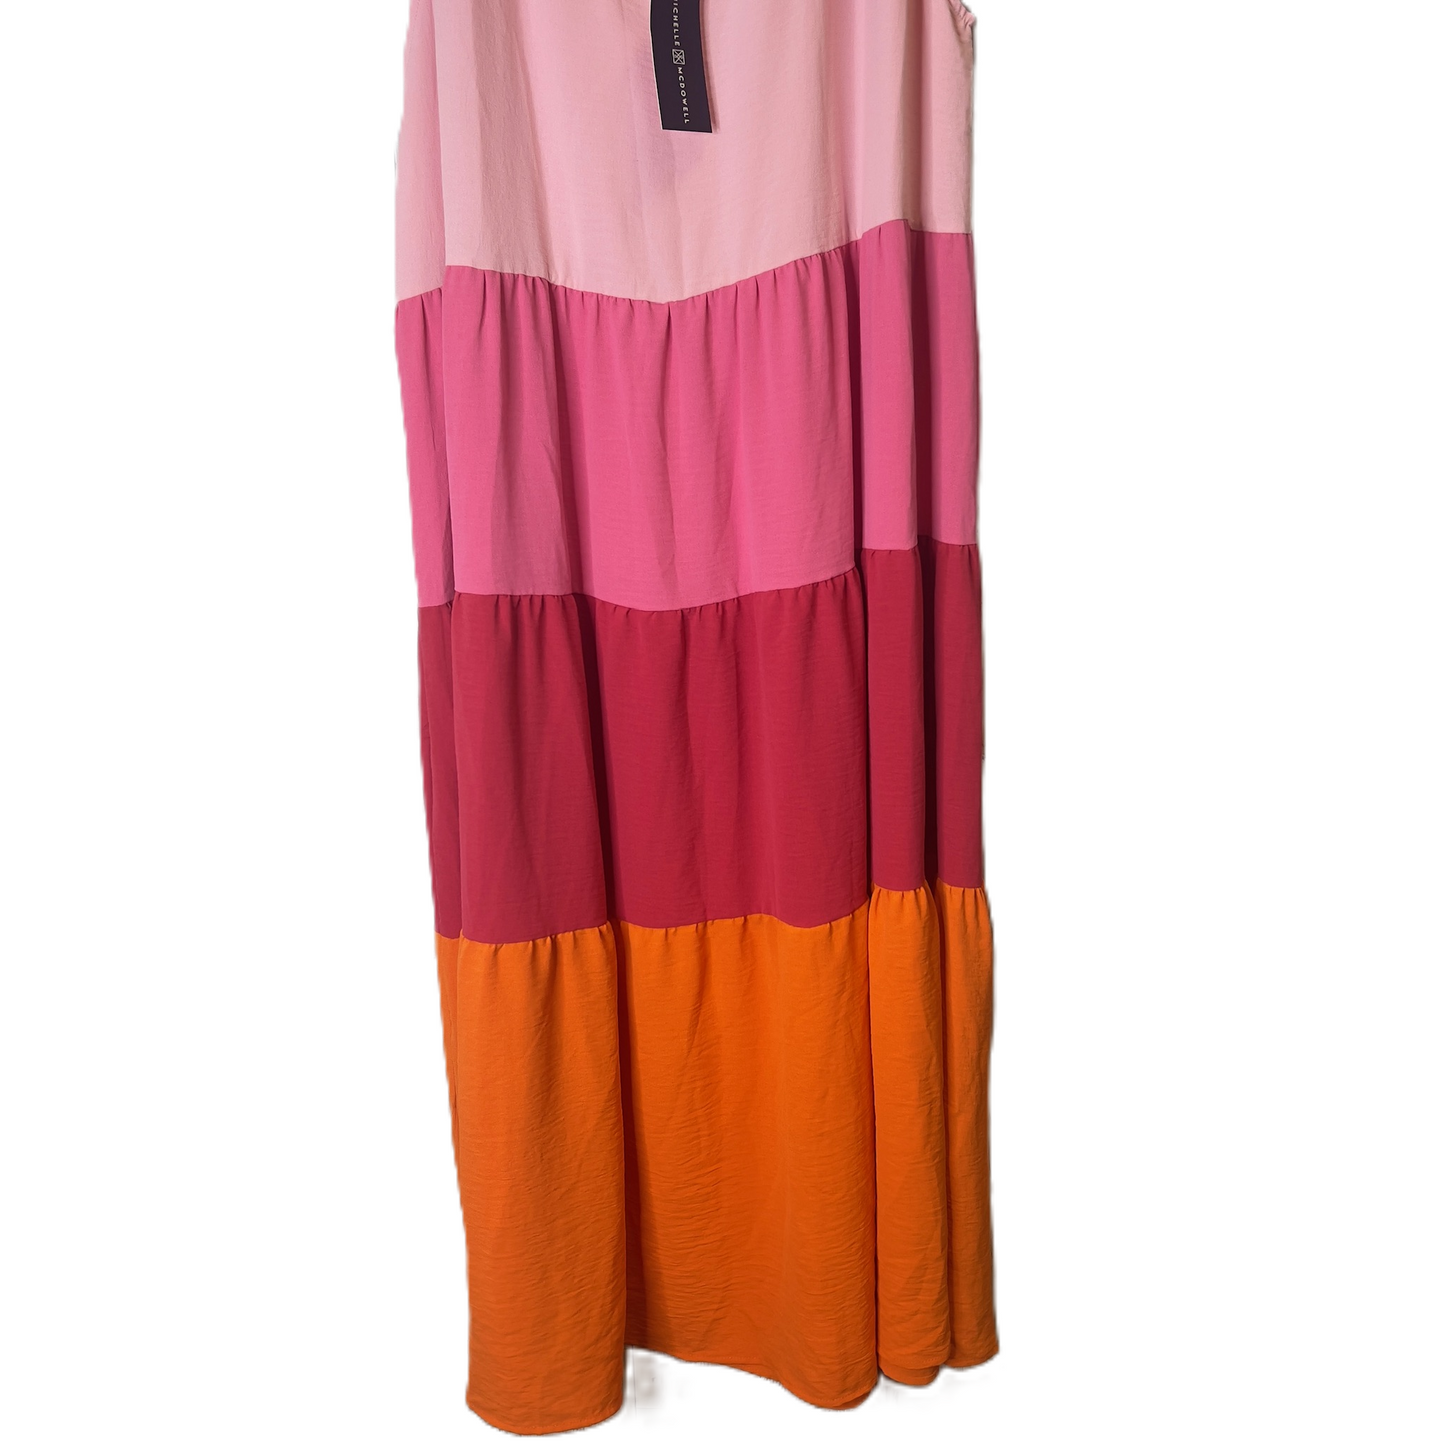 Pink Dress Casual Midi By Clothes Mentor, Size: 1x